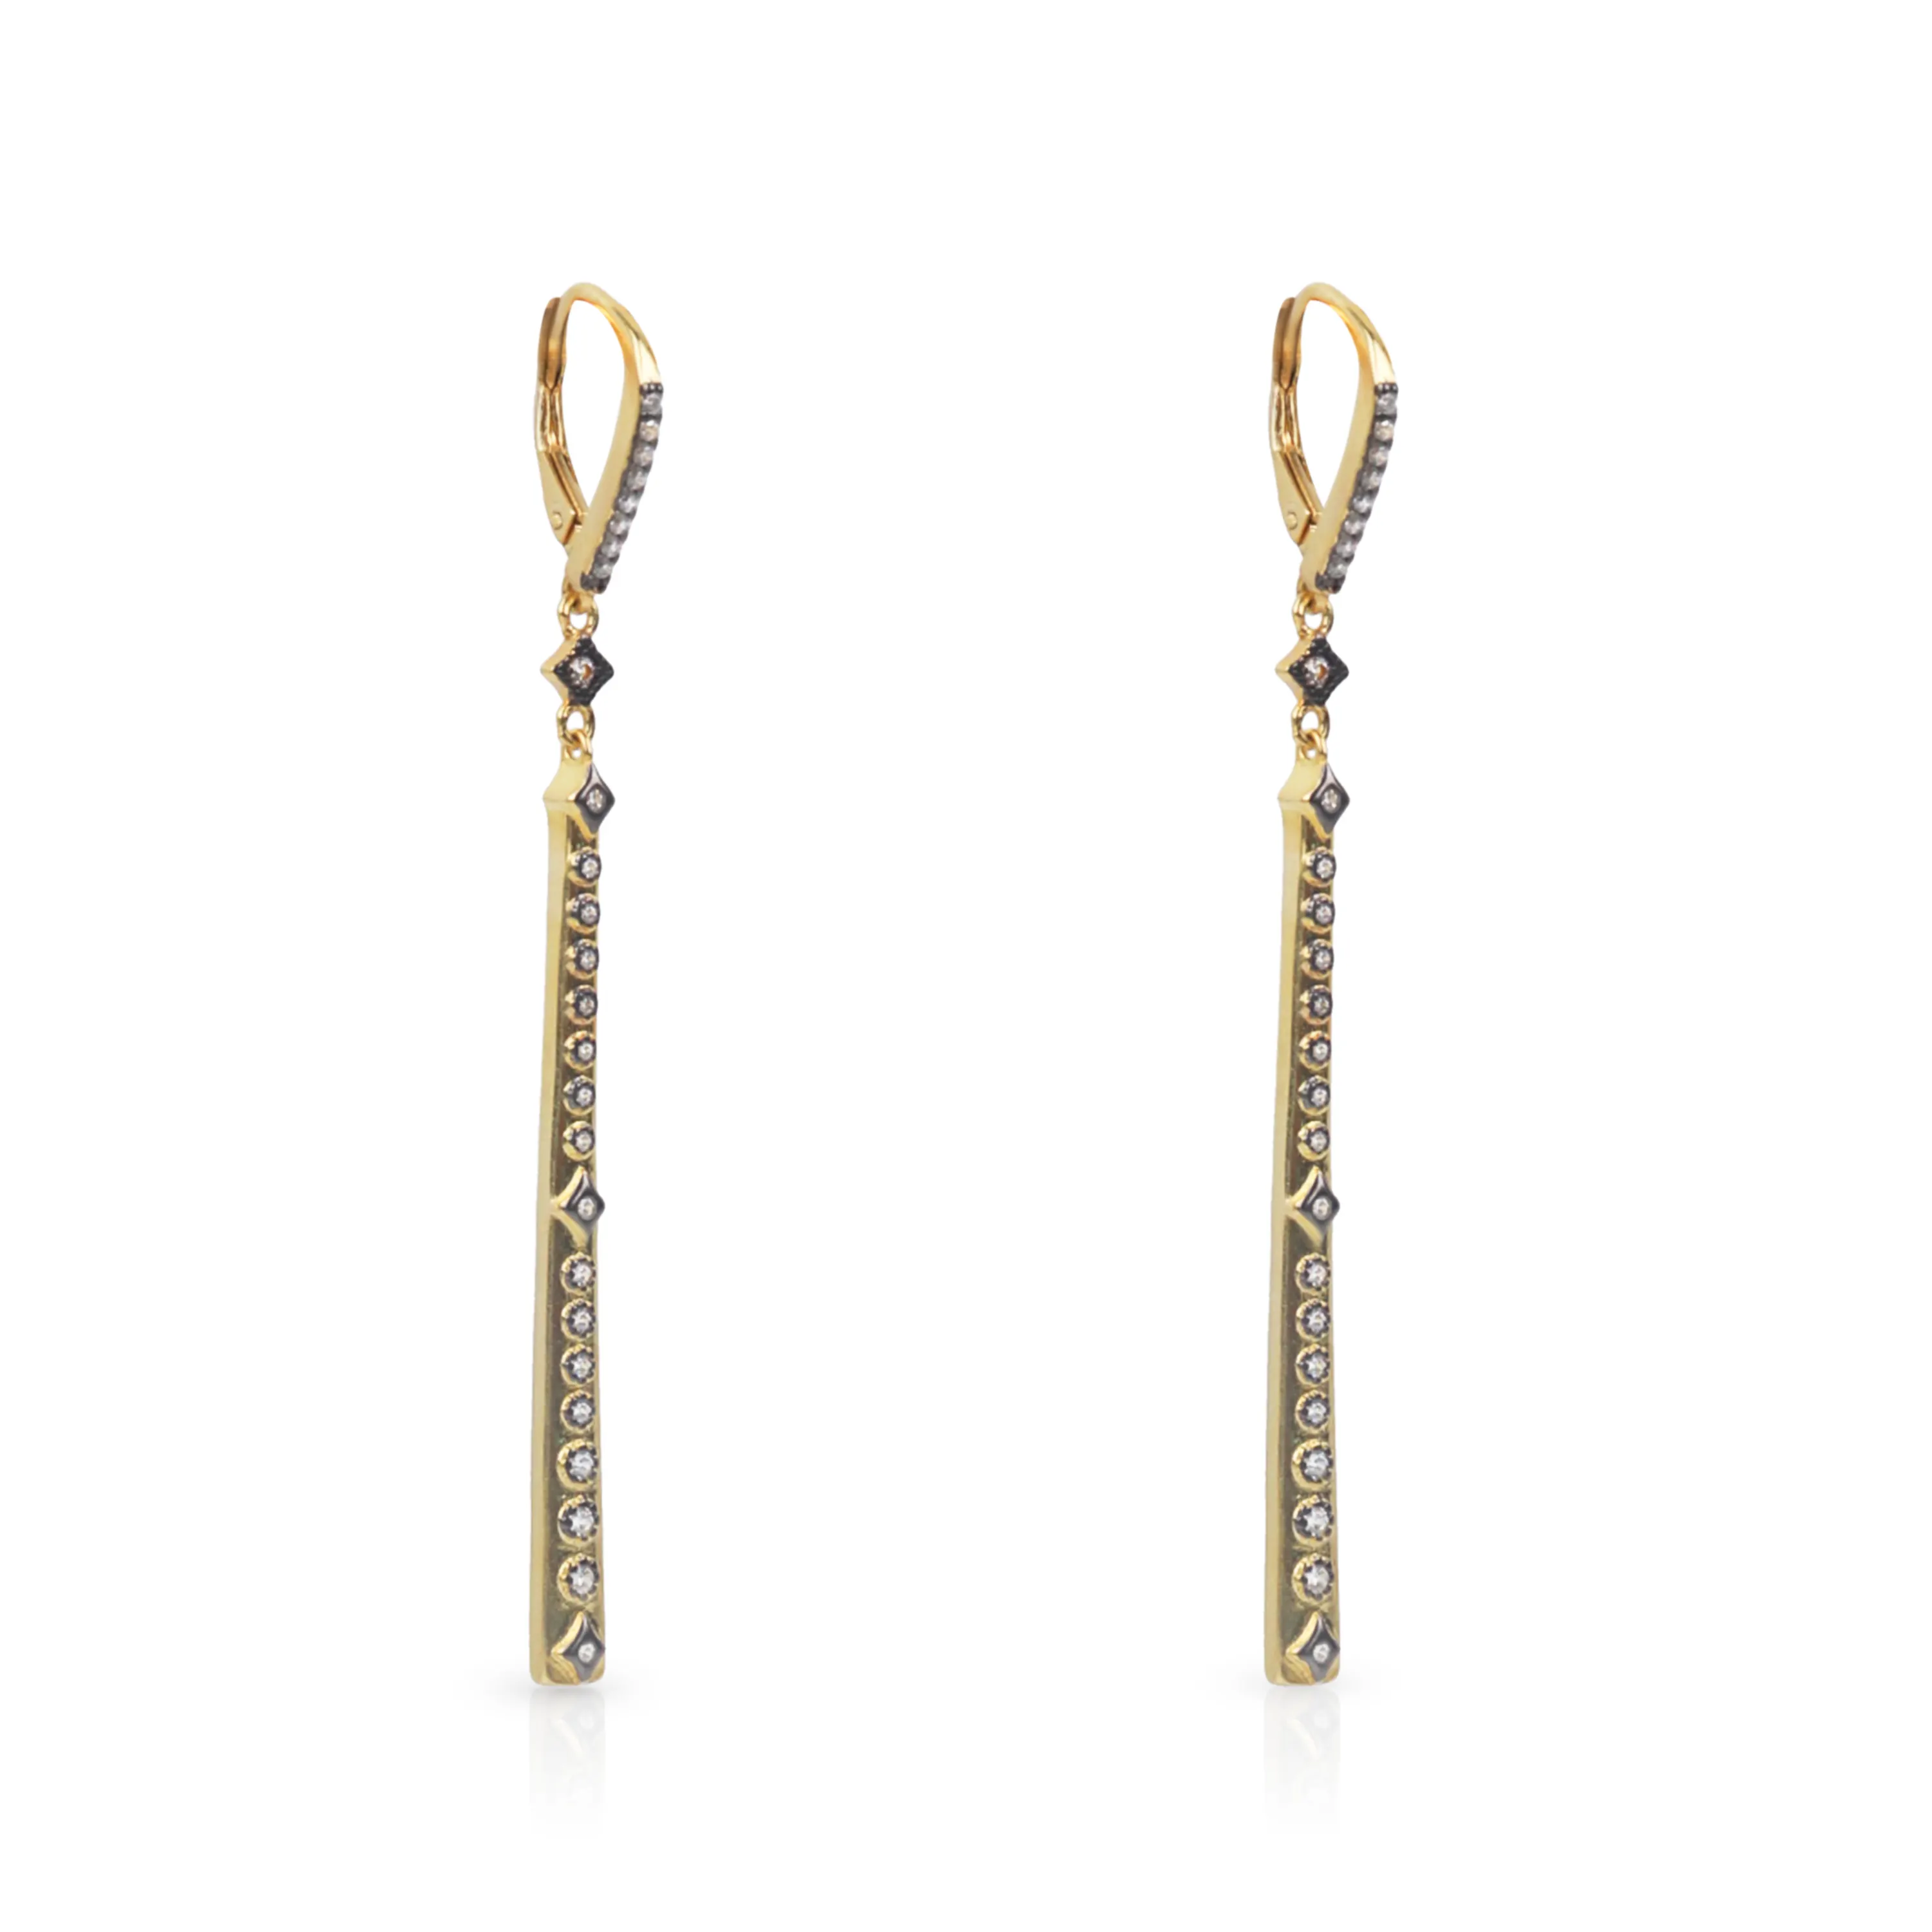 Chris April in stock fine jewelry 925 sterling silver 14k gold plated Custom vermeil court style drop earrings